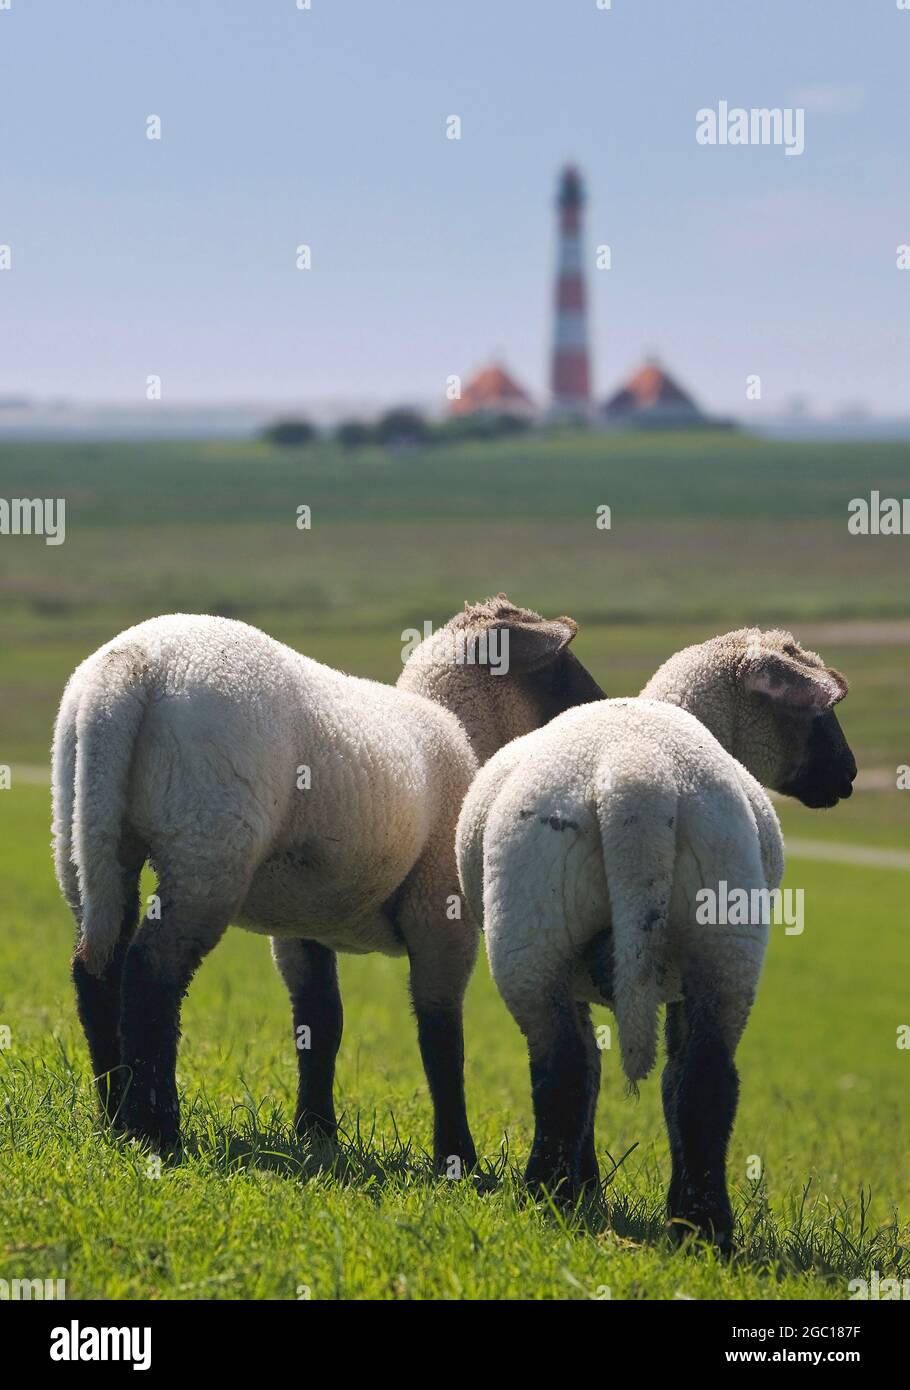 domestic sheep (Ovis ammon f. aries), two young sheep standing together, Westerheversand lighthouse in the background, Germany, Schleswig-Holstein, Stock Photo